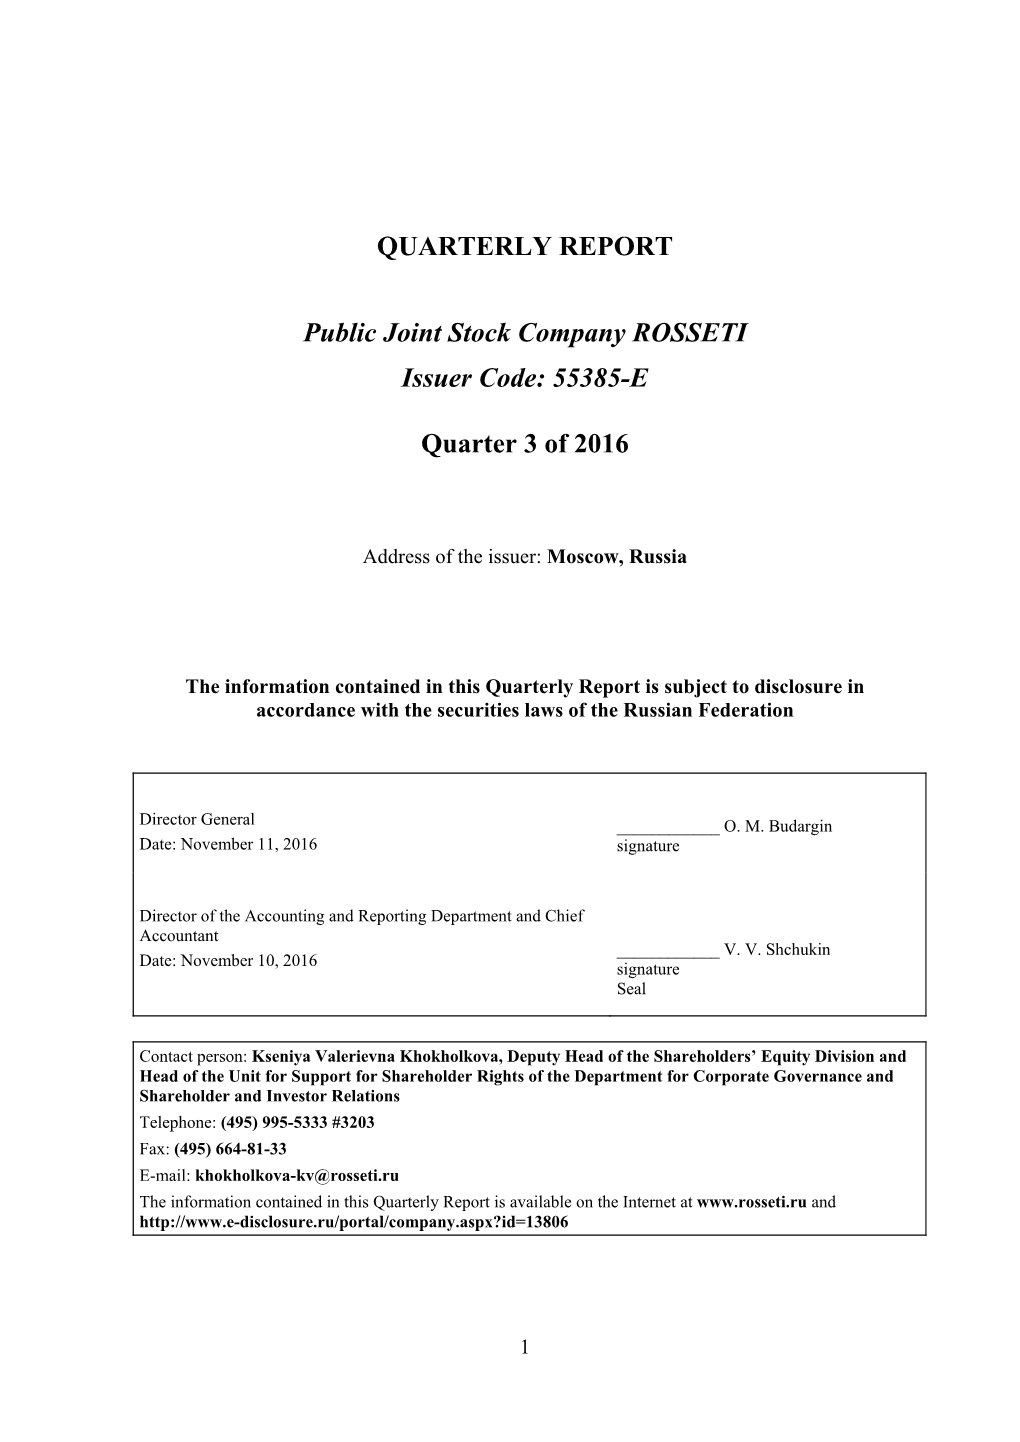 QUARTERLY REPORT Public Joint Stock Company ROSSETI Issuer Code